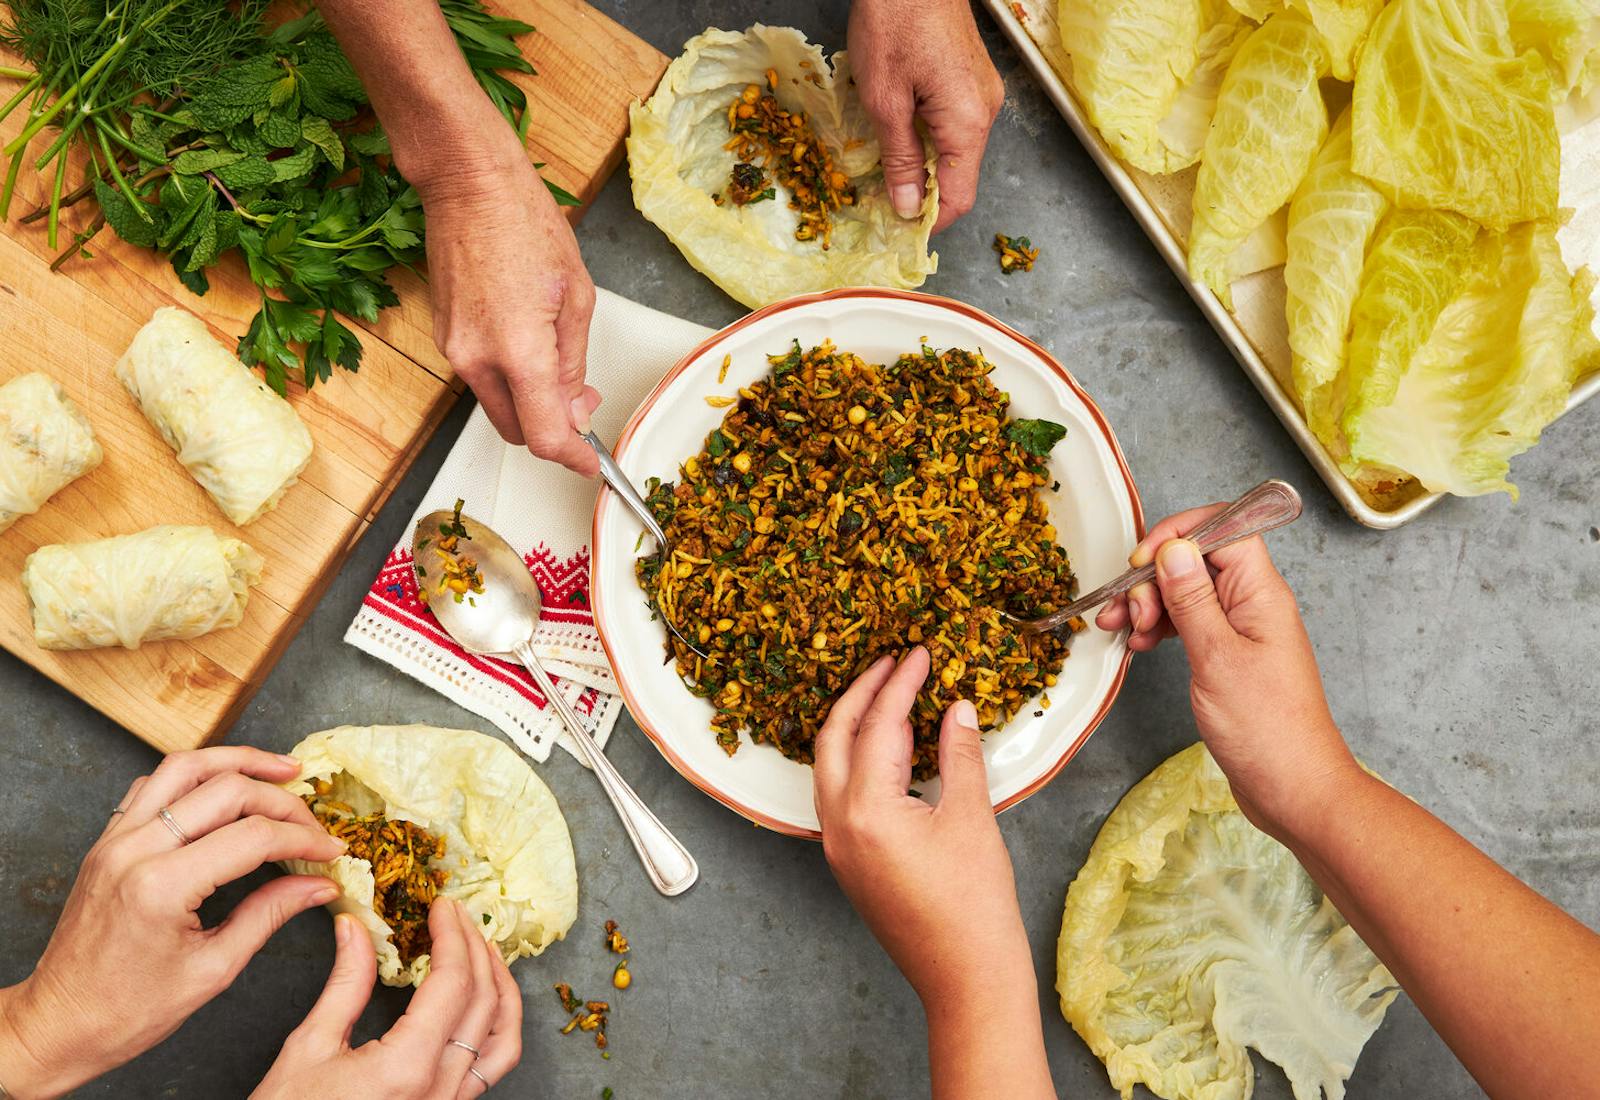 Festive dinner scene with three people stuffing cabbage leaves with rice mixture and herbs.